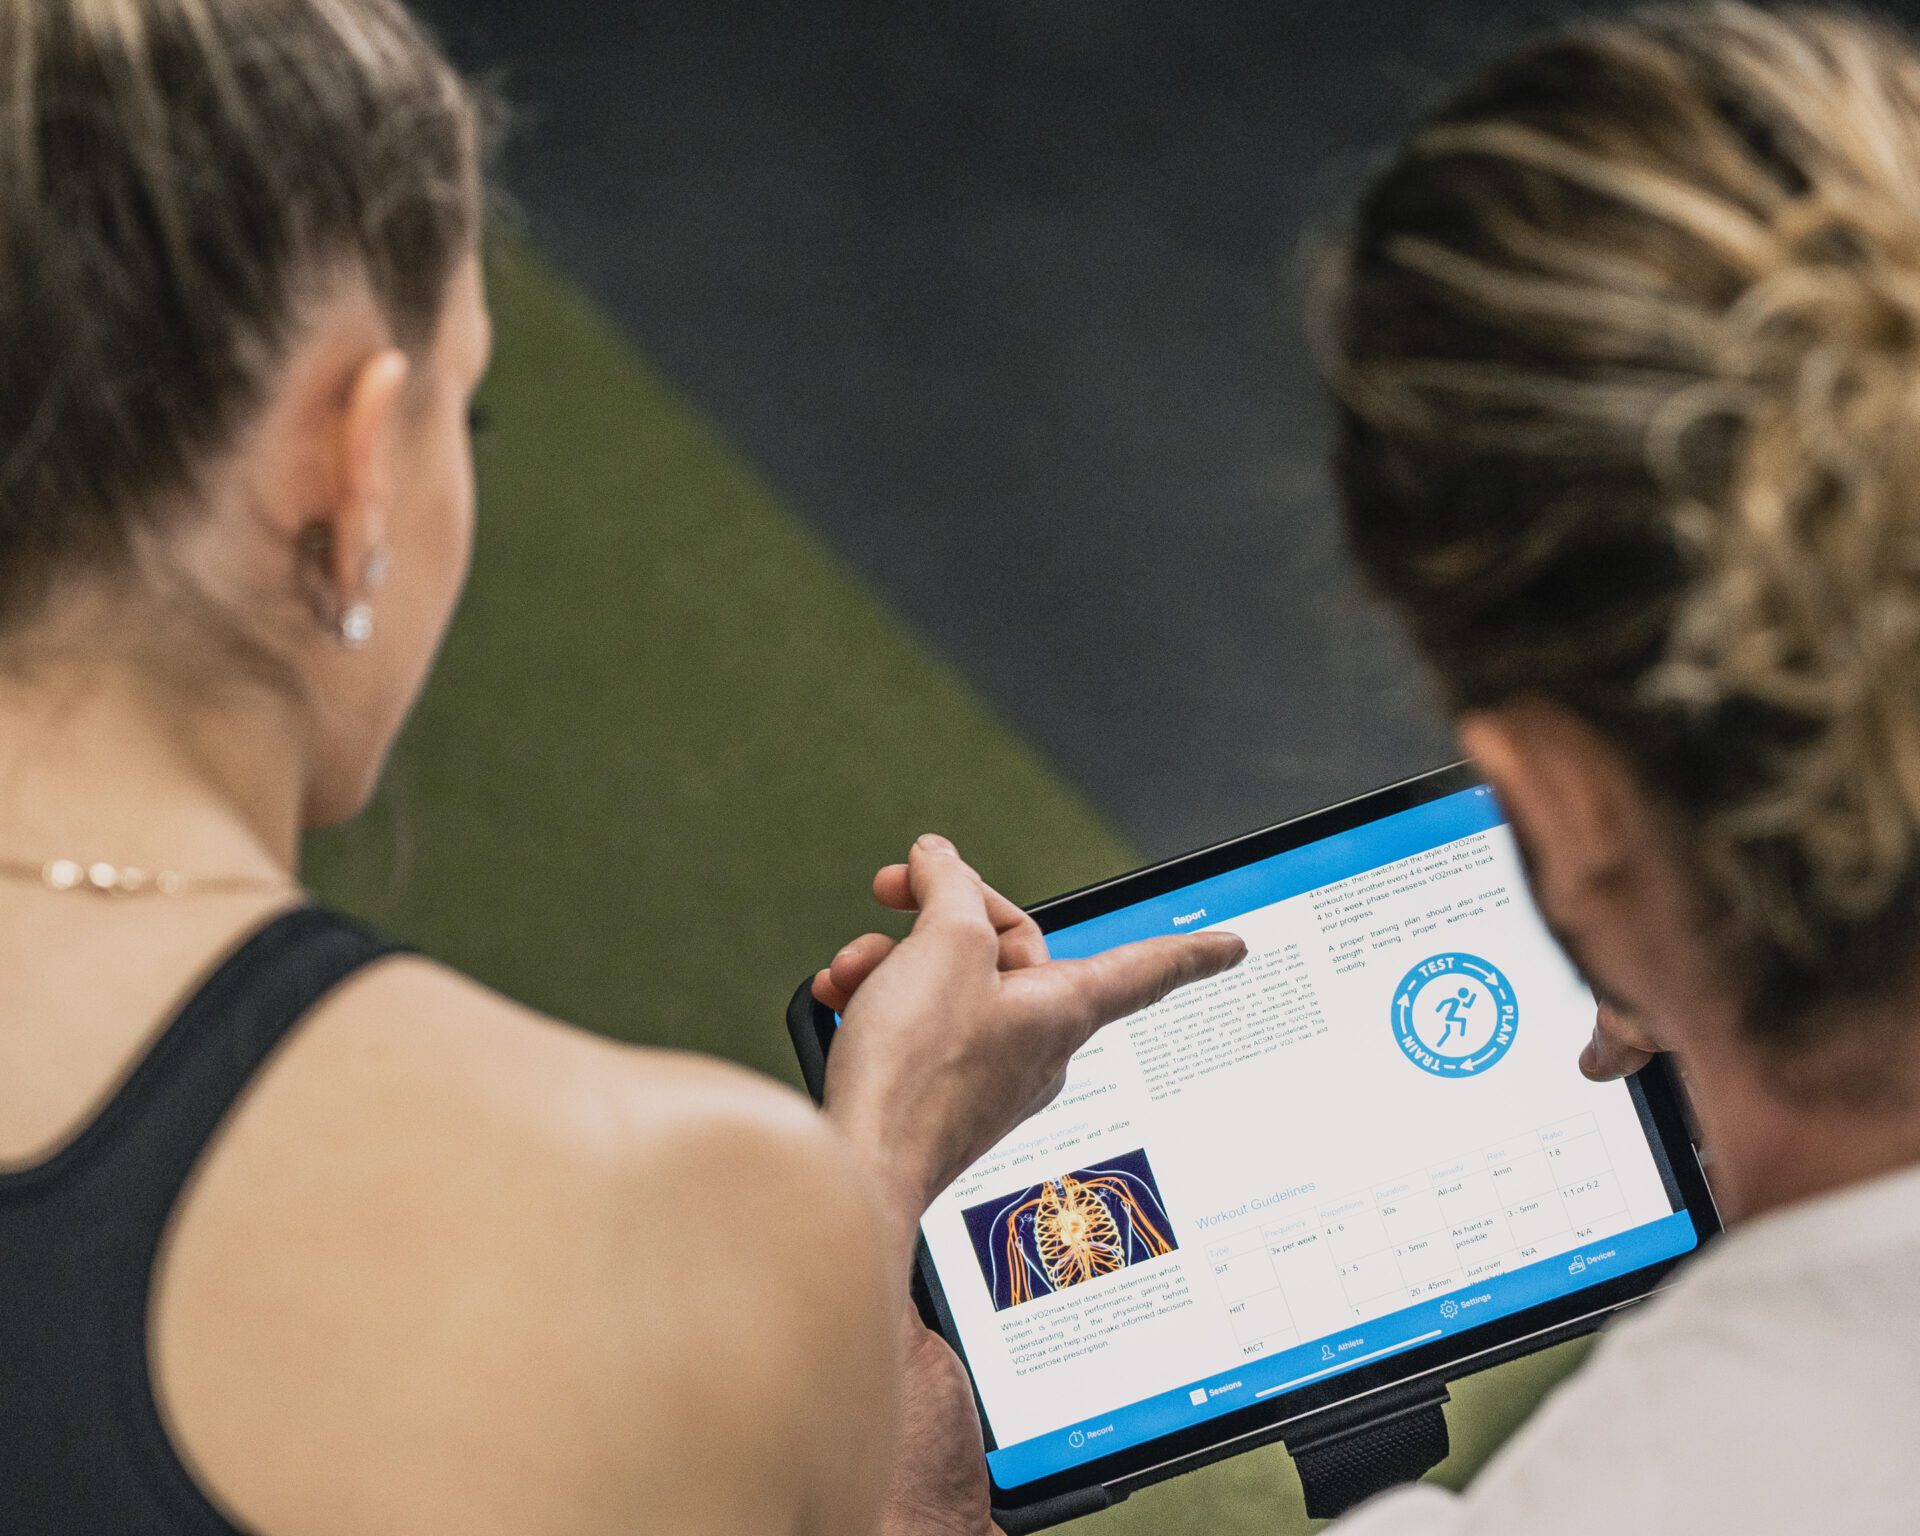 Athletic woman reviewing performance testing results on an Ipad